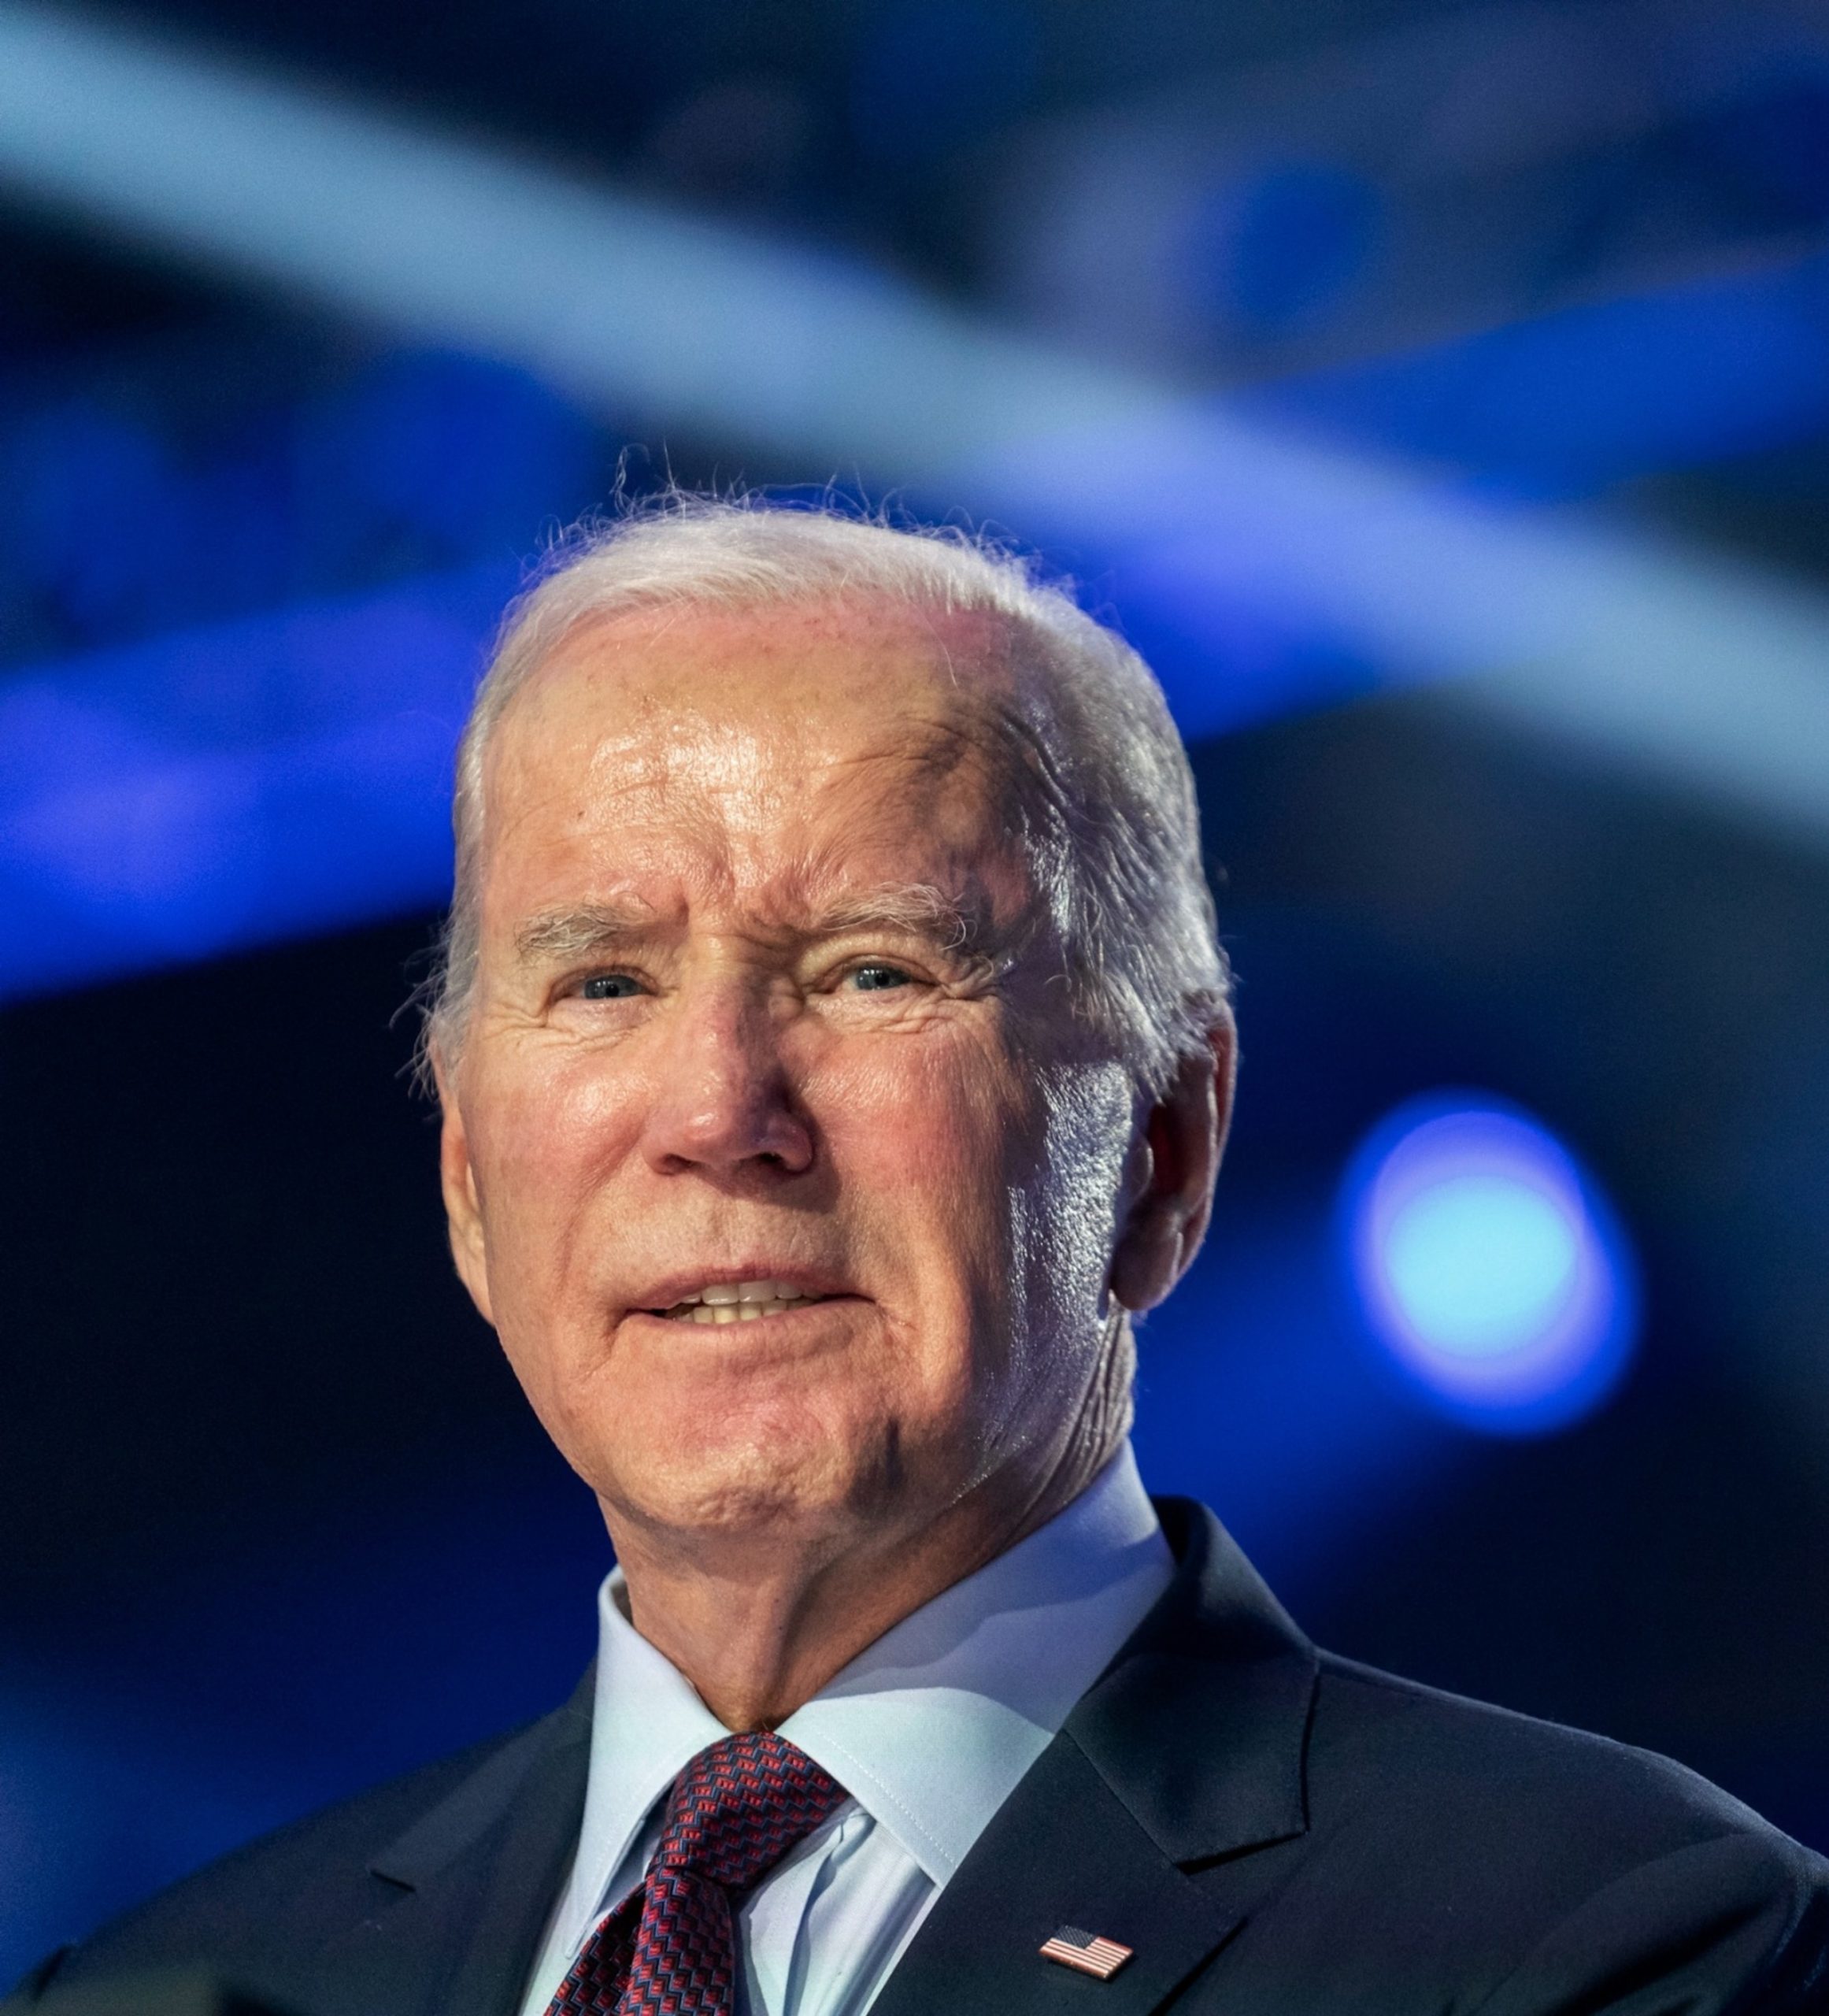 Sources indicate that the special counsel investigating classified documents in the Biden administration anticipates releasing a report within the next few days.